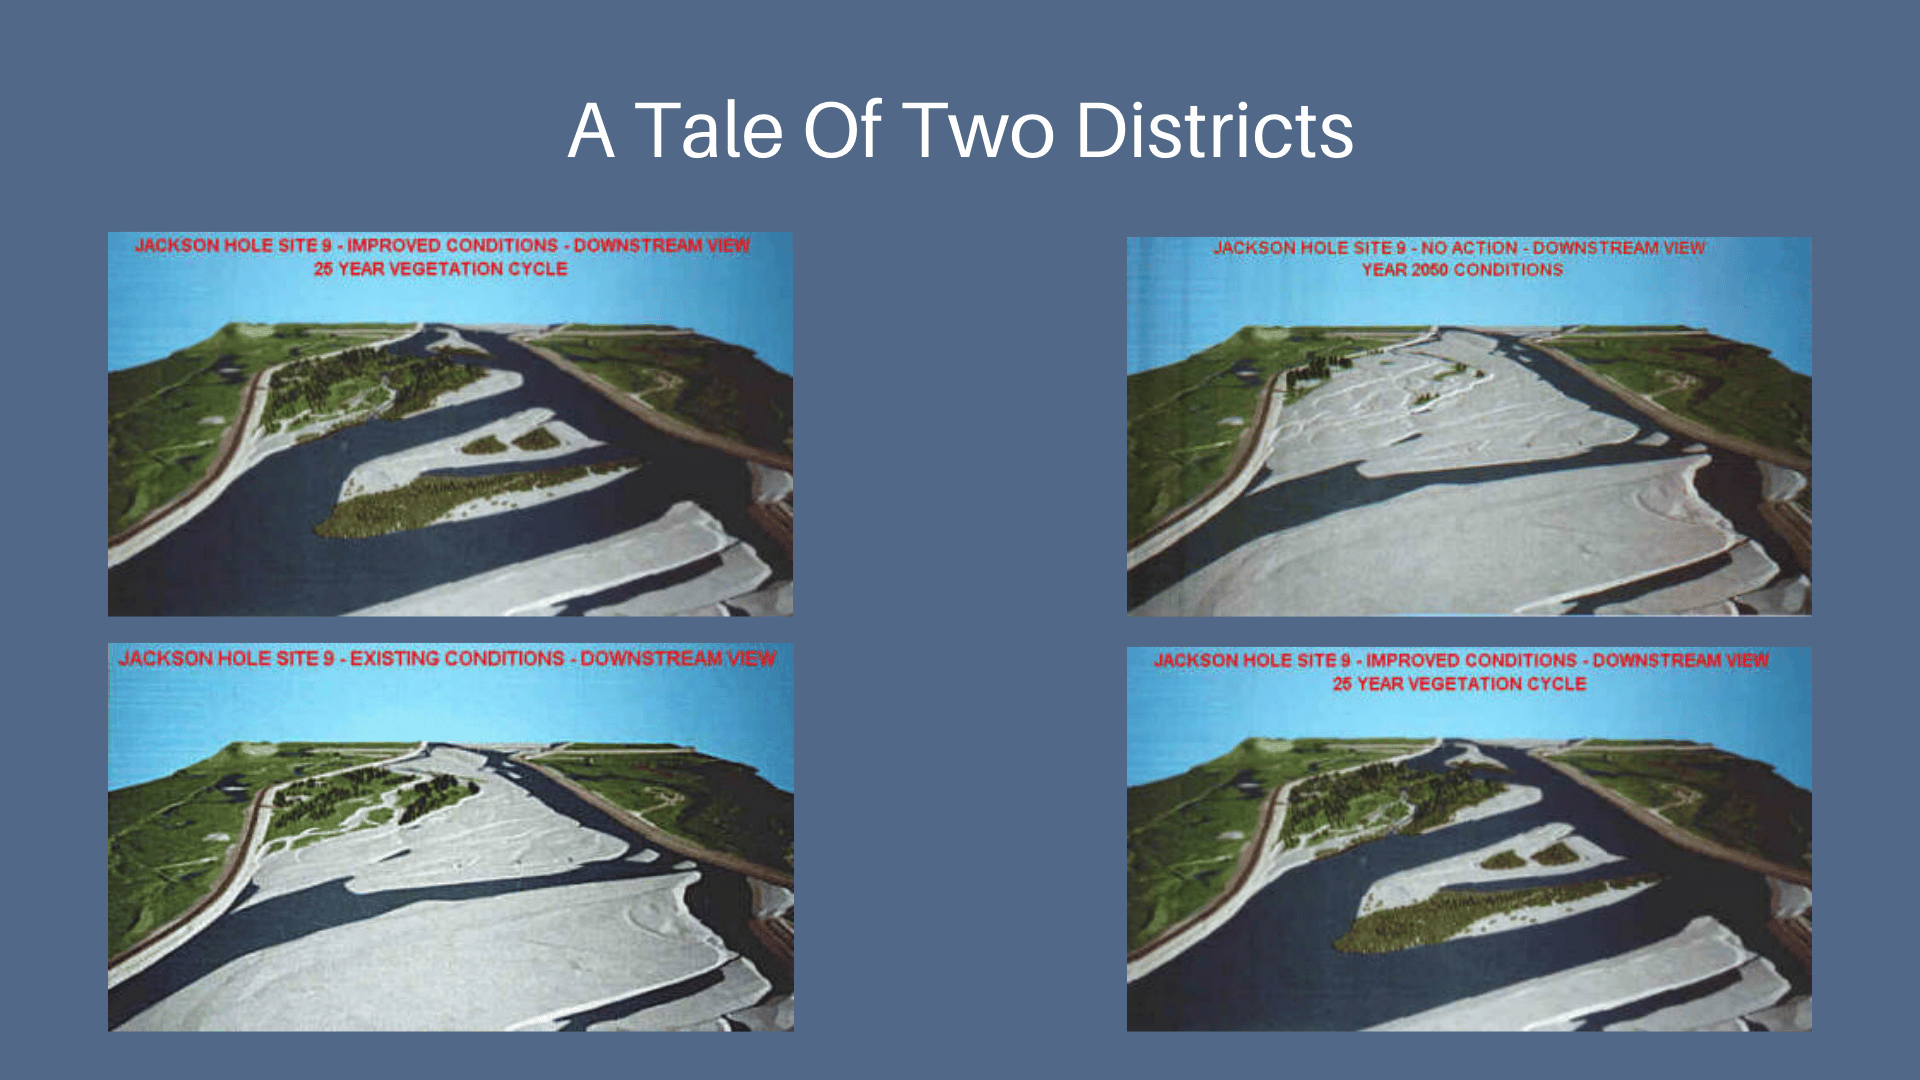 A Tale of Two Districts